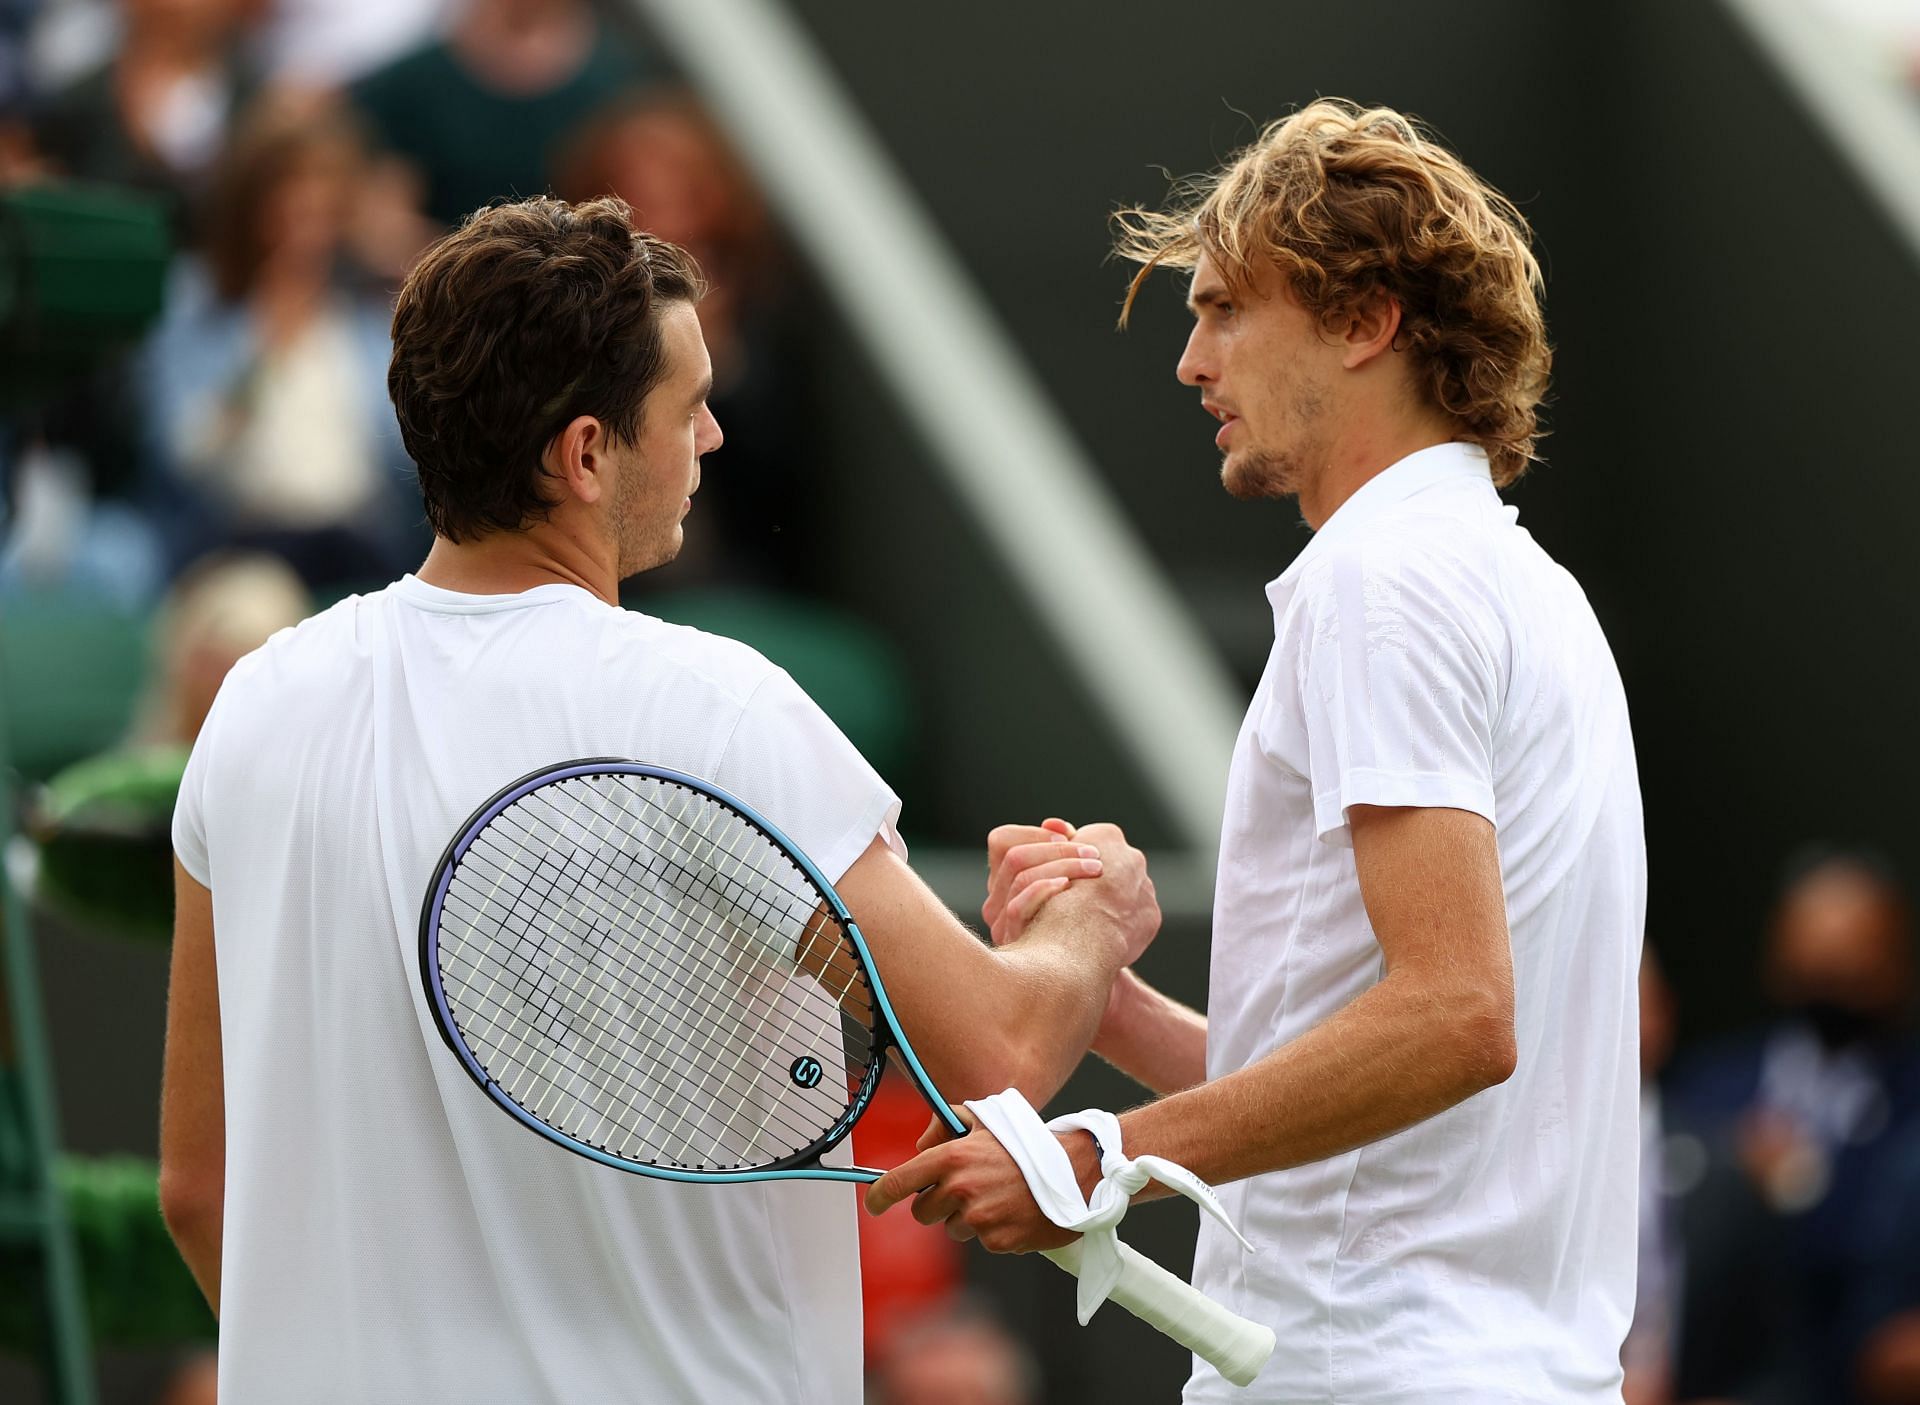 Taylor Fritz and Alexander Zverev at the Wimbledon Championships 2021